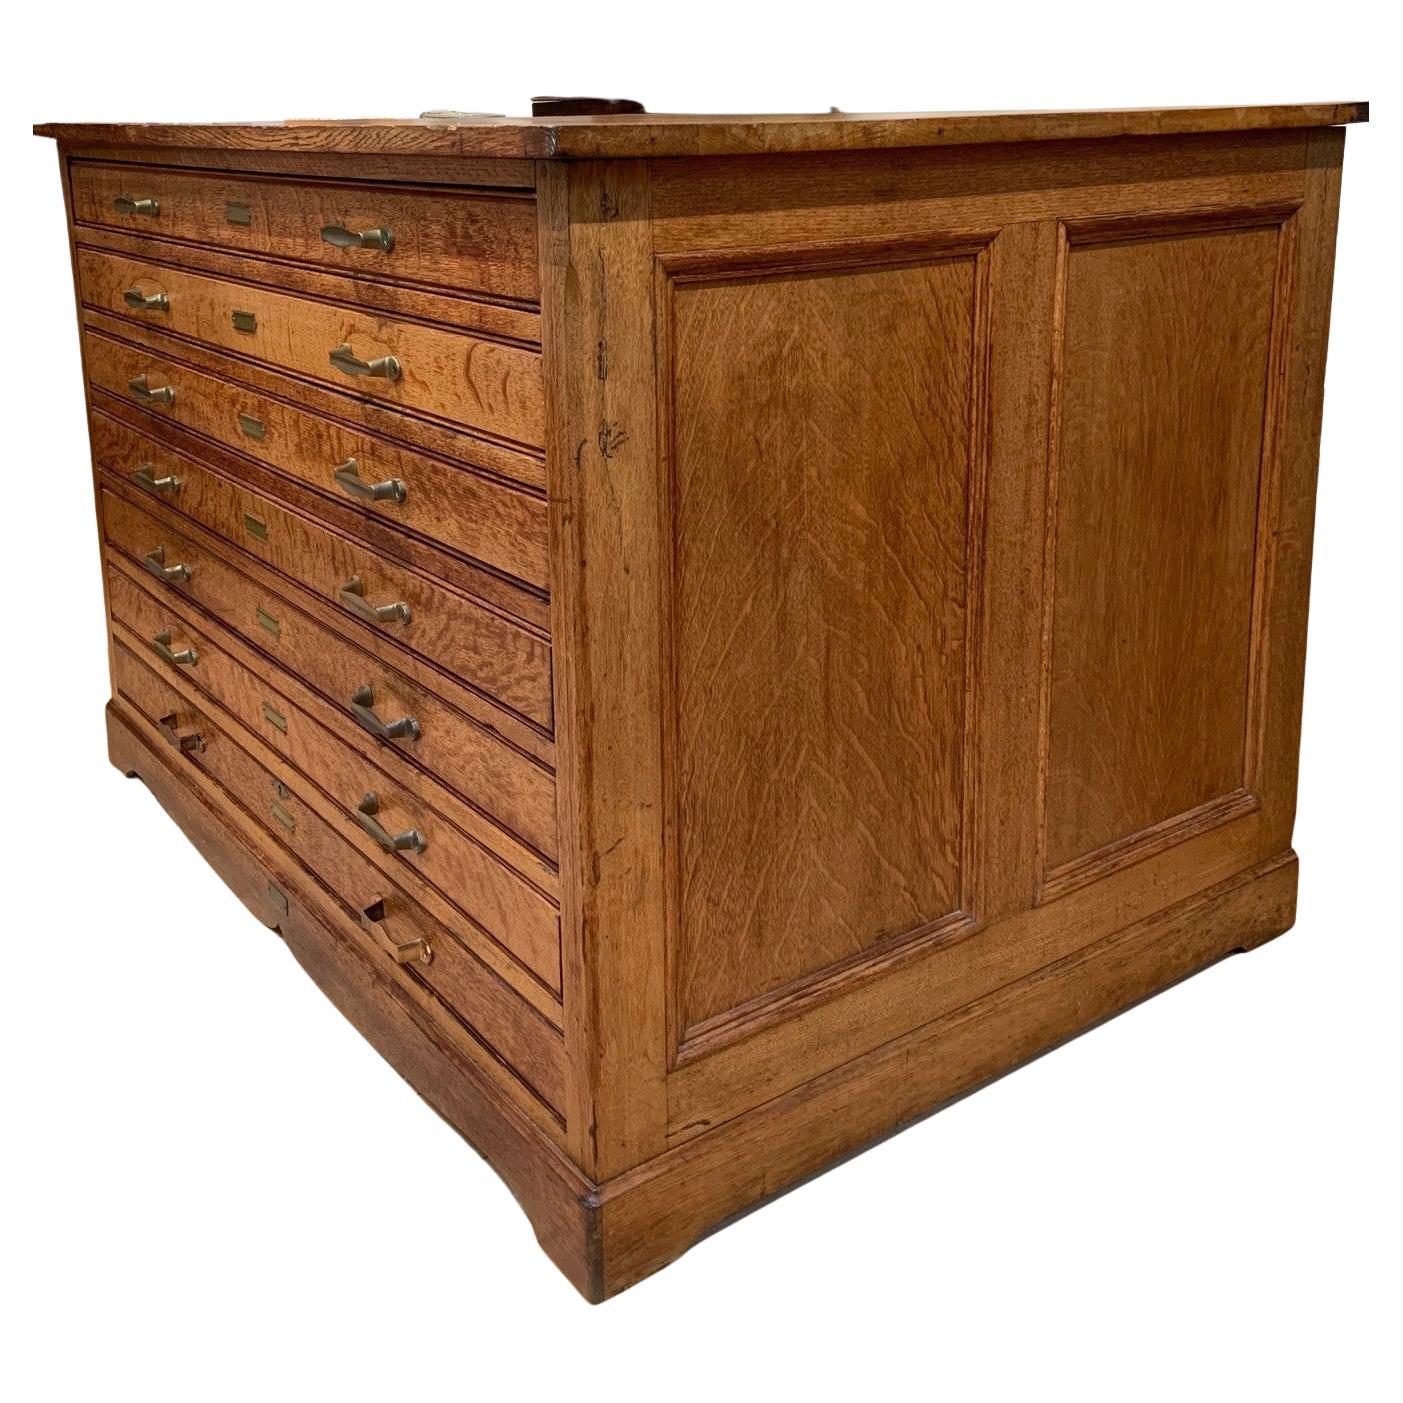 Large American Keuffel And Esser Flat File Cabinet, Early 20th century

This is an exceptional flat file cabinet made by Keuffel & Esser Co. of New York, most likely in the early 1900s. It has seven drawers: six divided into two 20.5